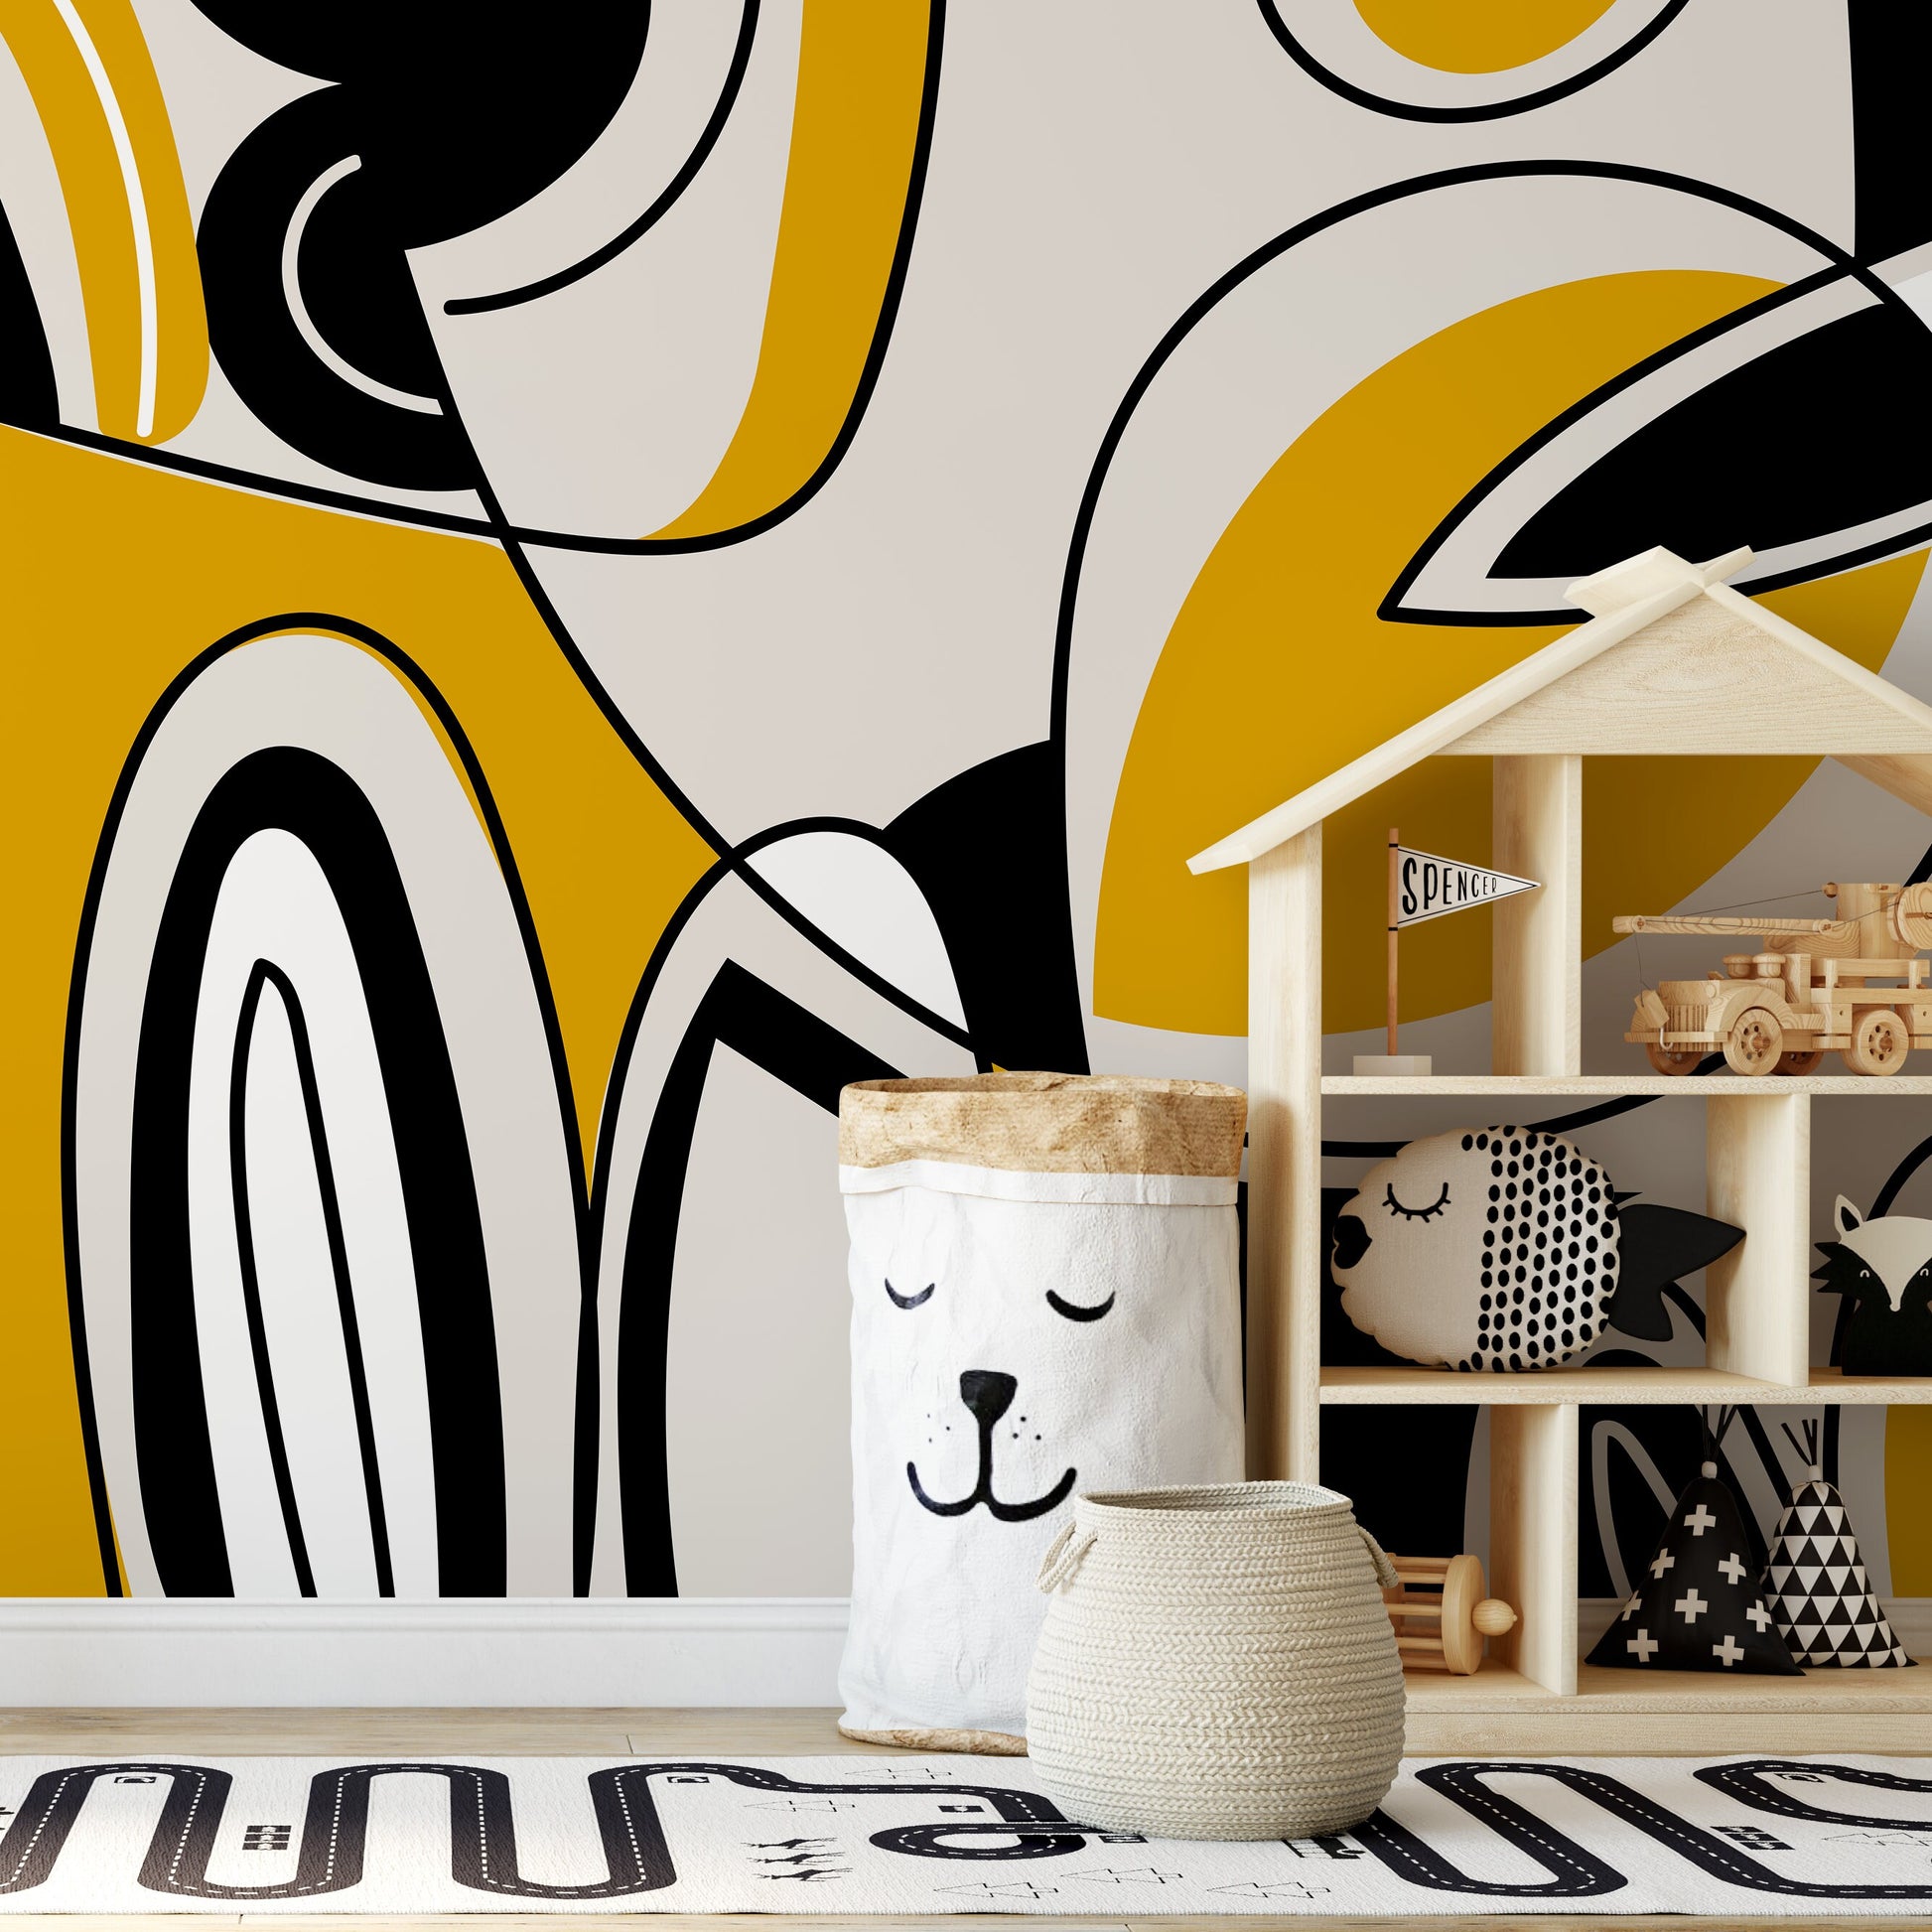 Black and Yellow Modern Wallpaper Abstract Mural Peel and Stick Wallpaper Home Decor - D560